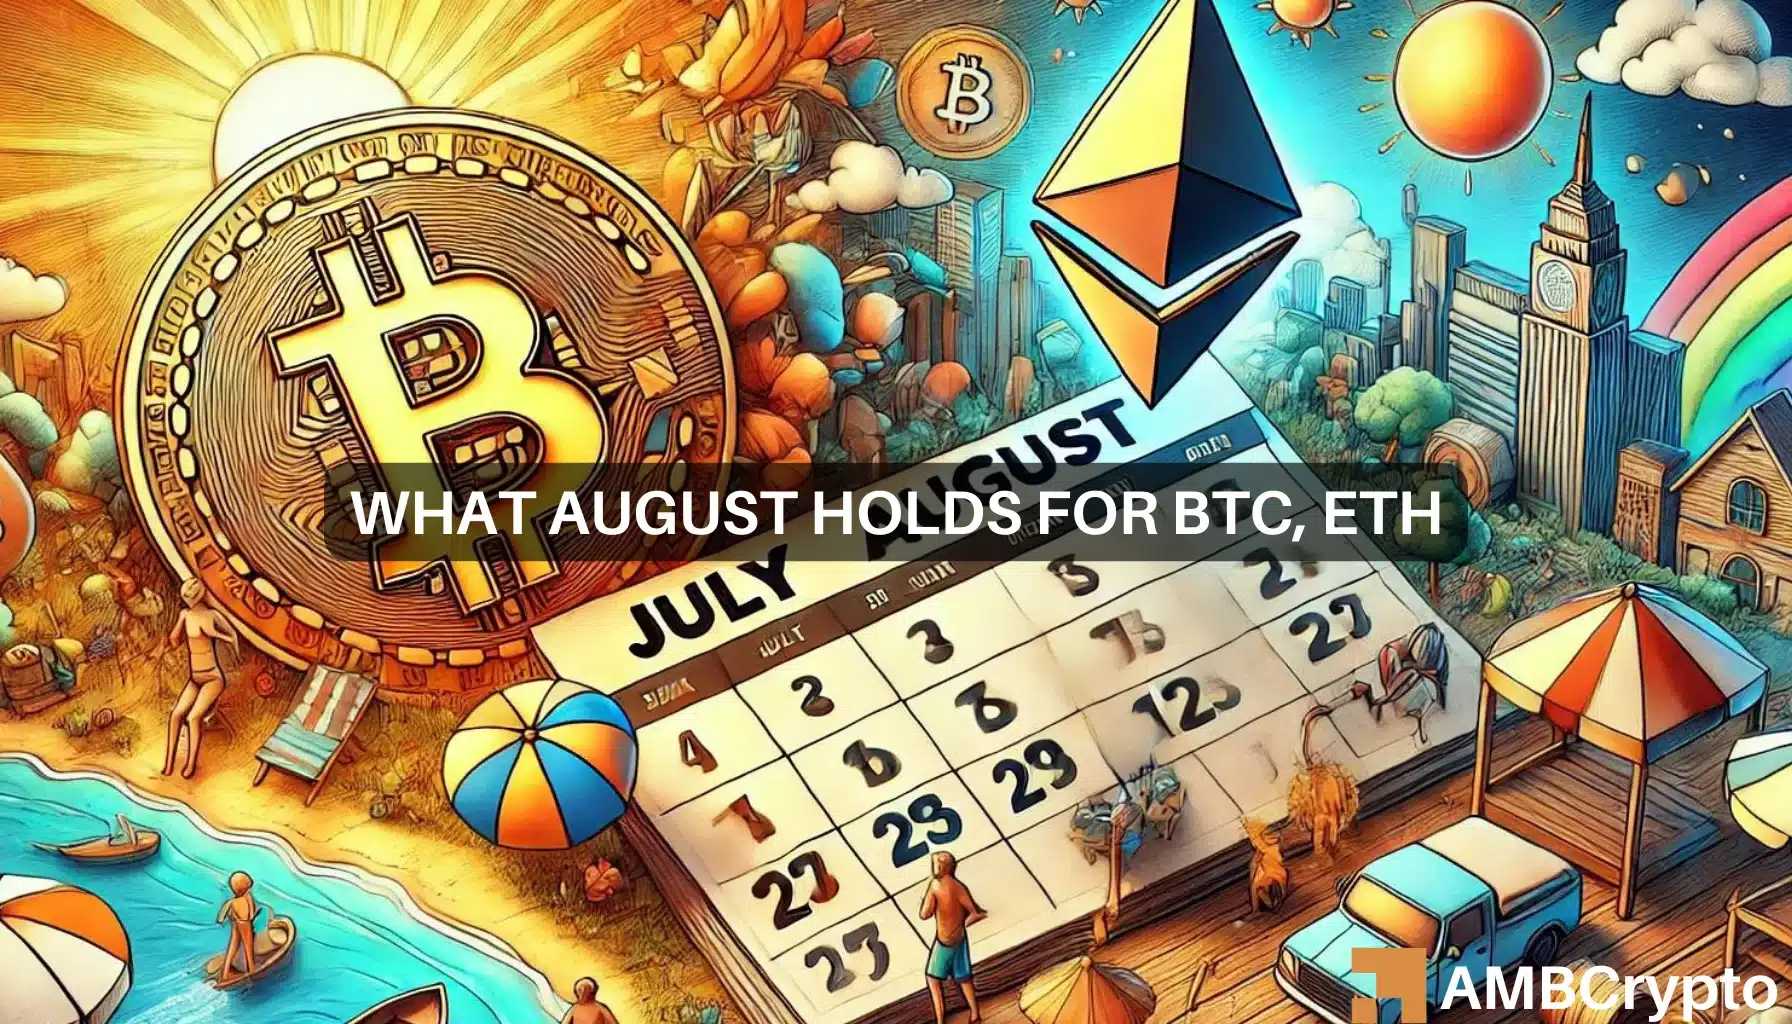 Bitcoin, Ethereum posted mixed results in July – What does August promise?